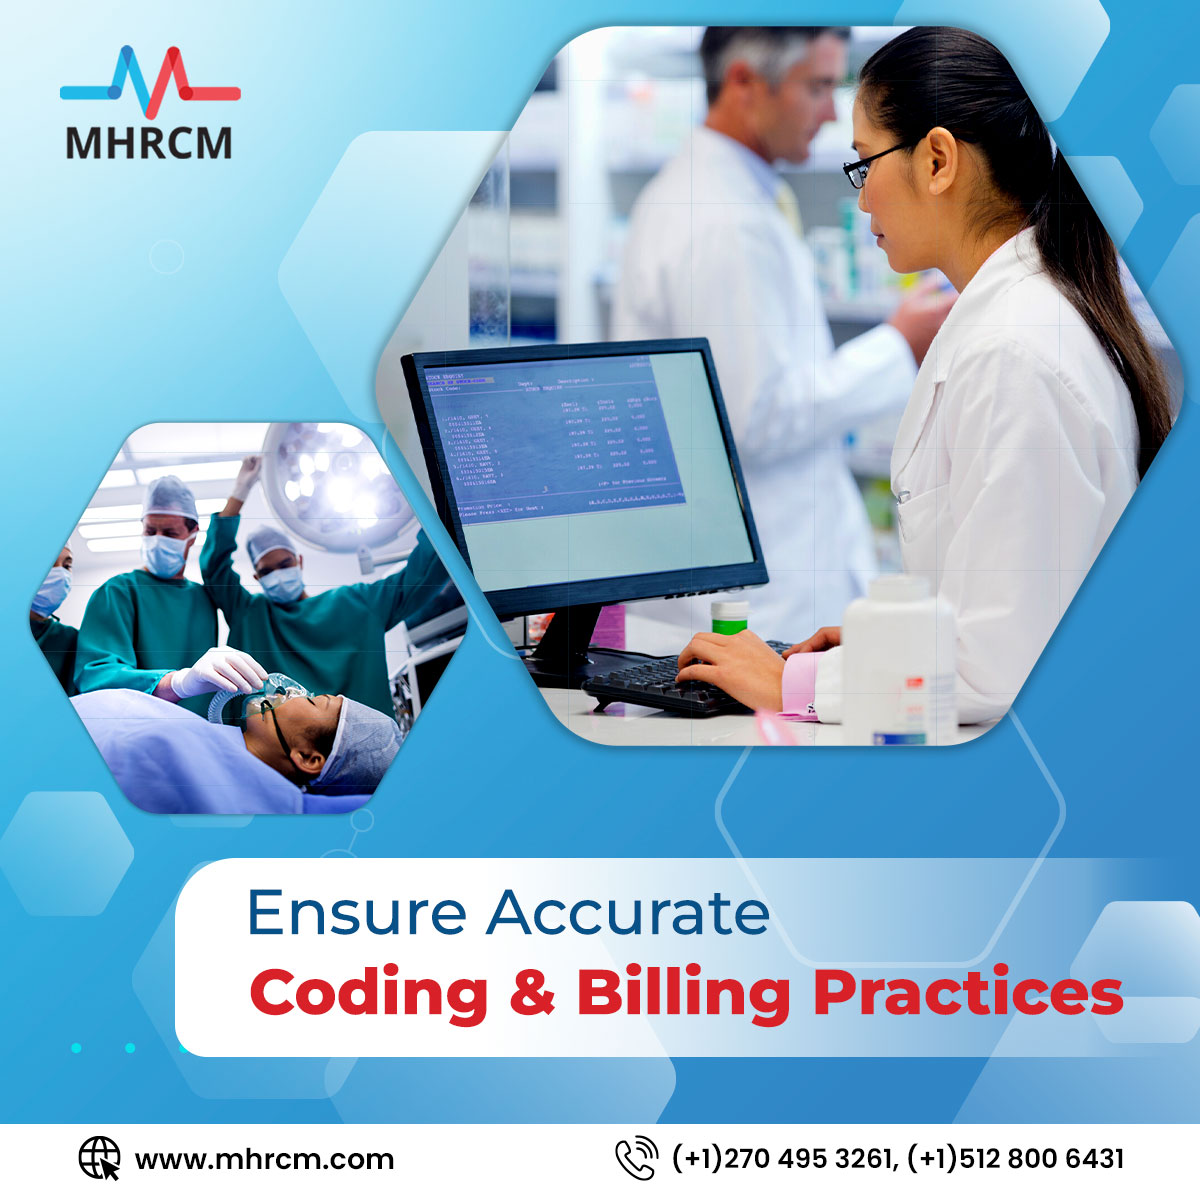 Our MHRCM expert team ensures accurate coding and billing practices so that you can focus on other healthcare services. Trust MHRCM to handle the billing complexities while you prioritize your patients. Let's elevate your practice together! #MHRCM | #MedicalBilling | #Healthcare